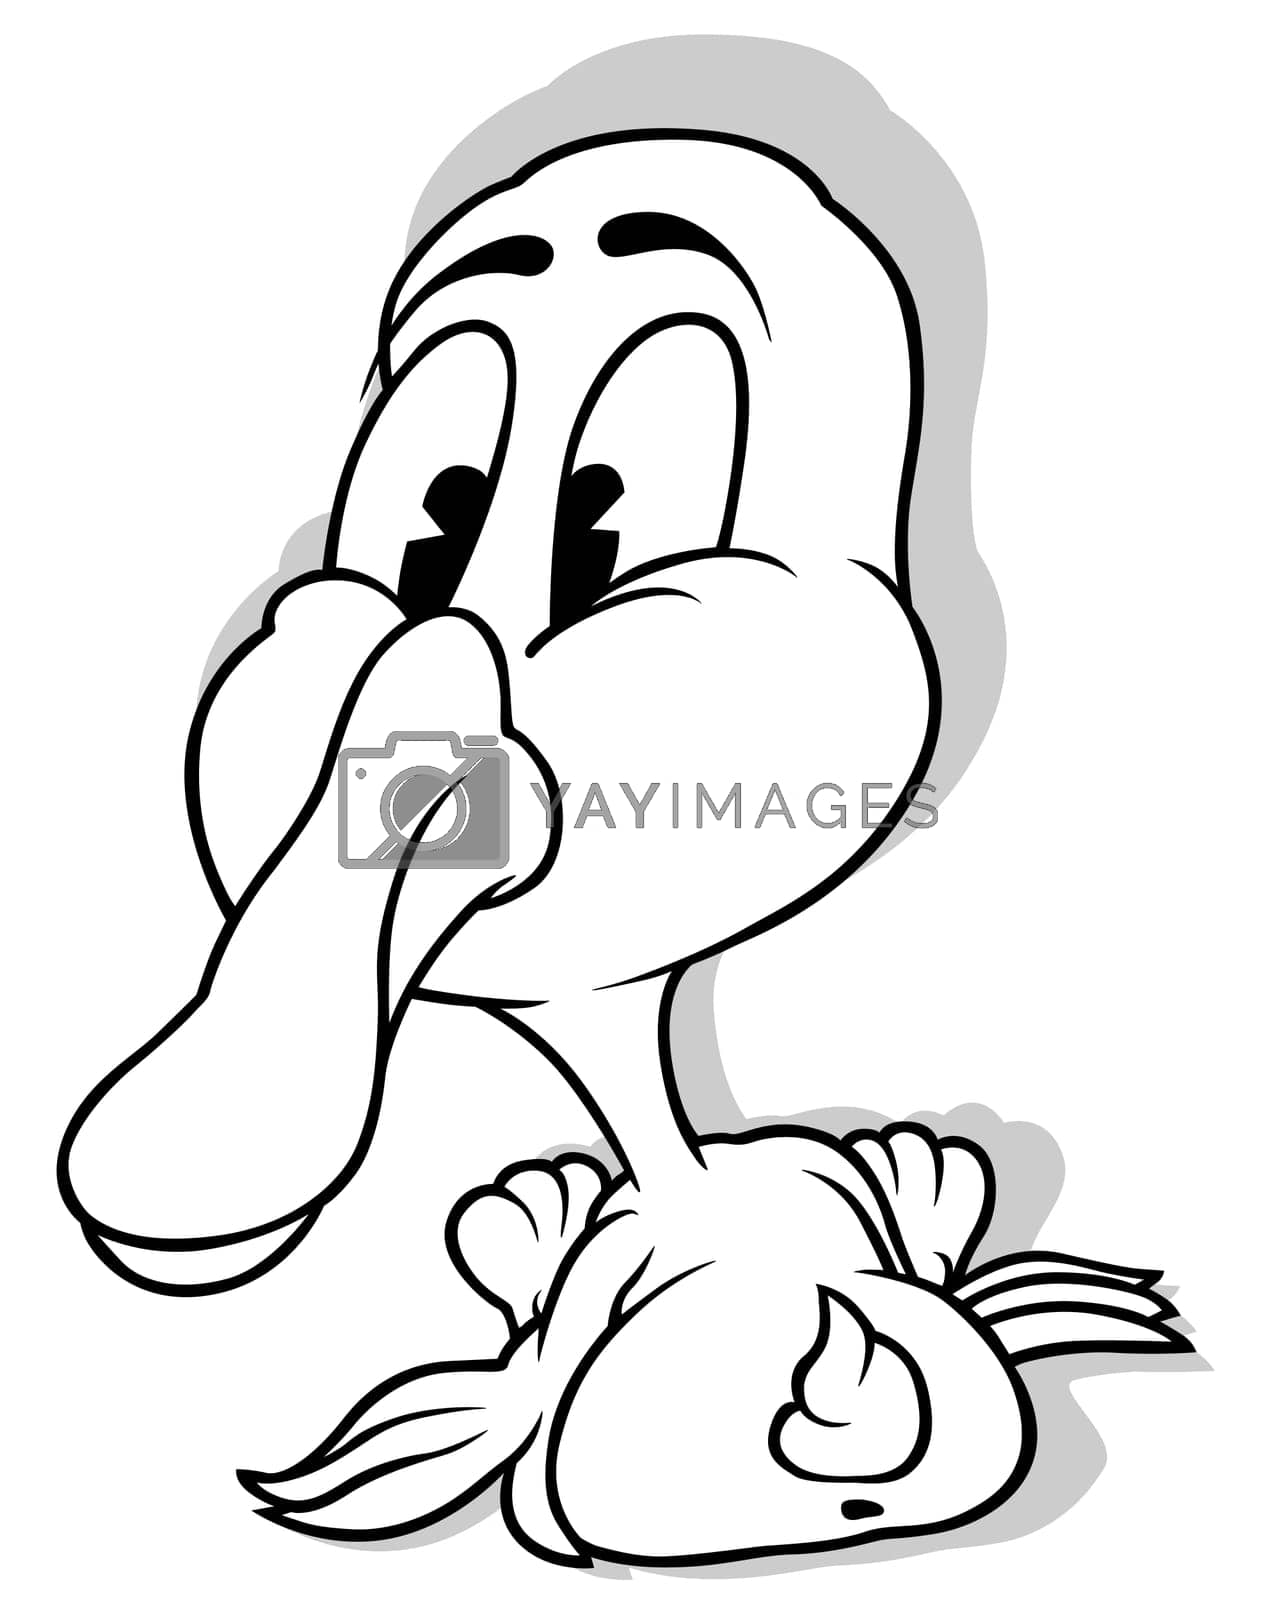 Royalty free image of Drawing of a Duckling with its Head Turned Back by illustratorCZ